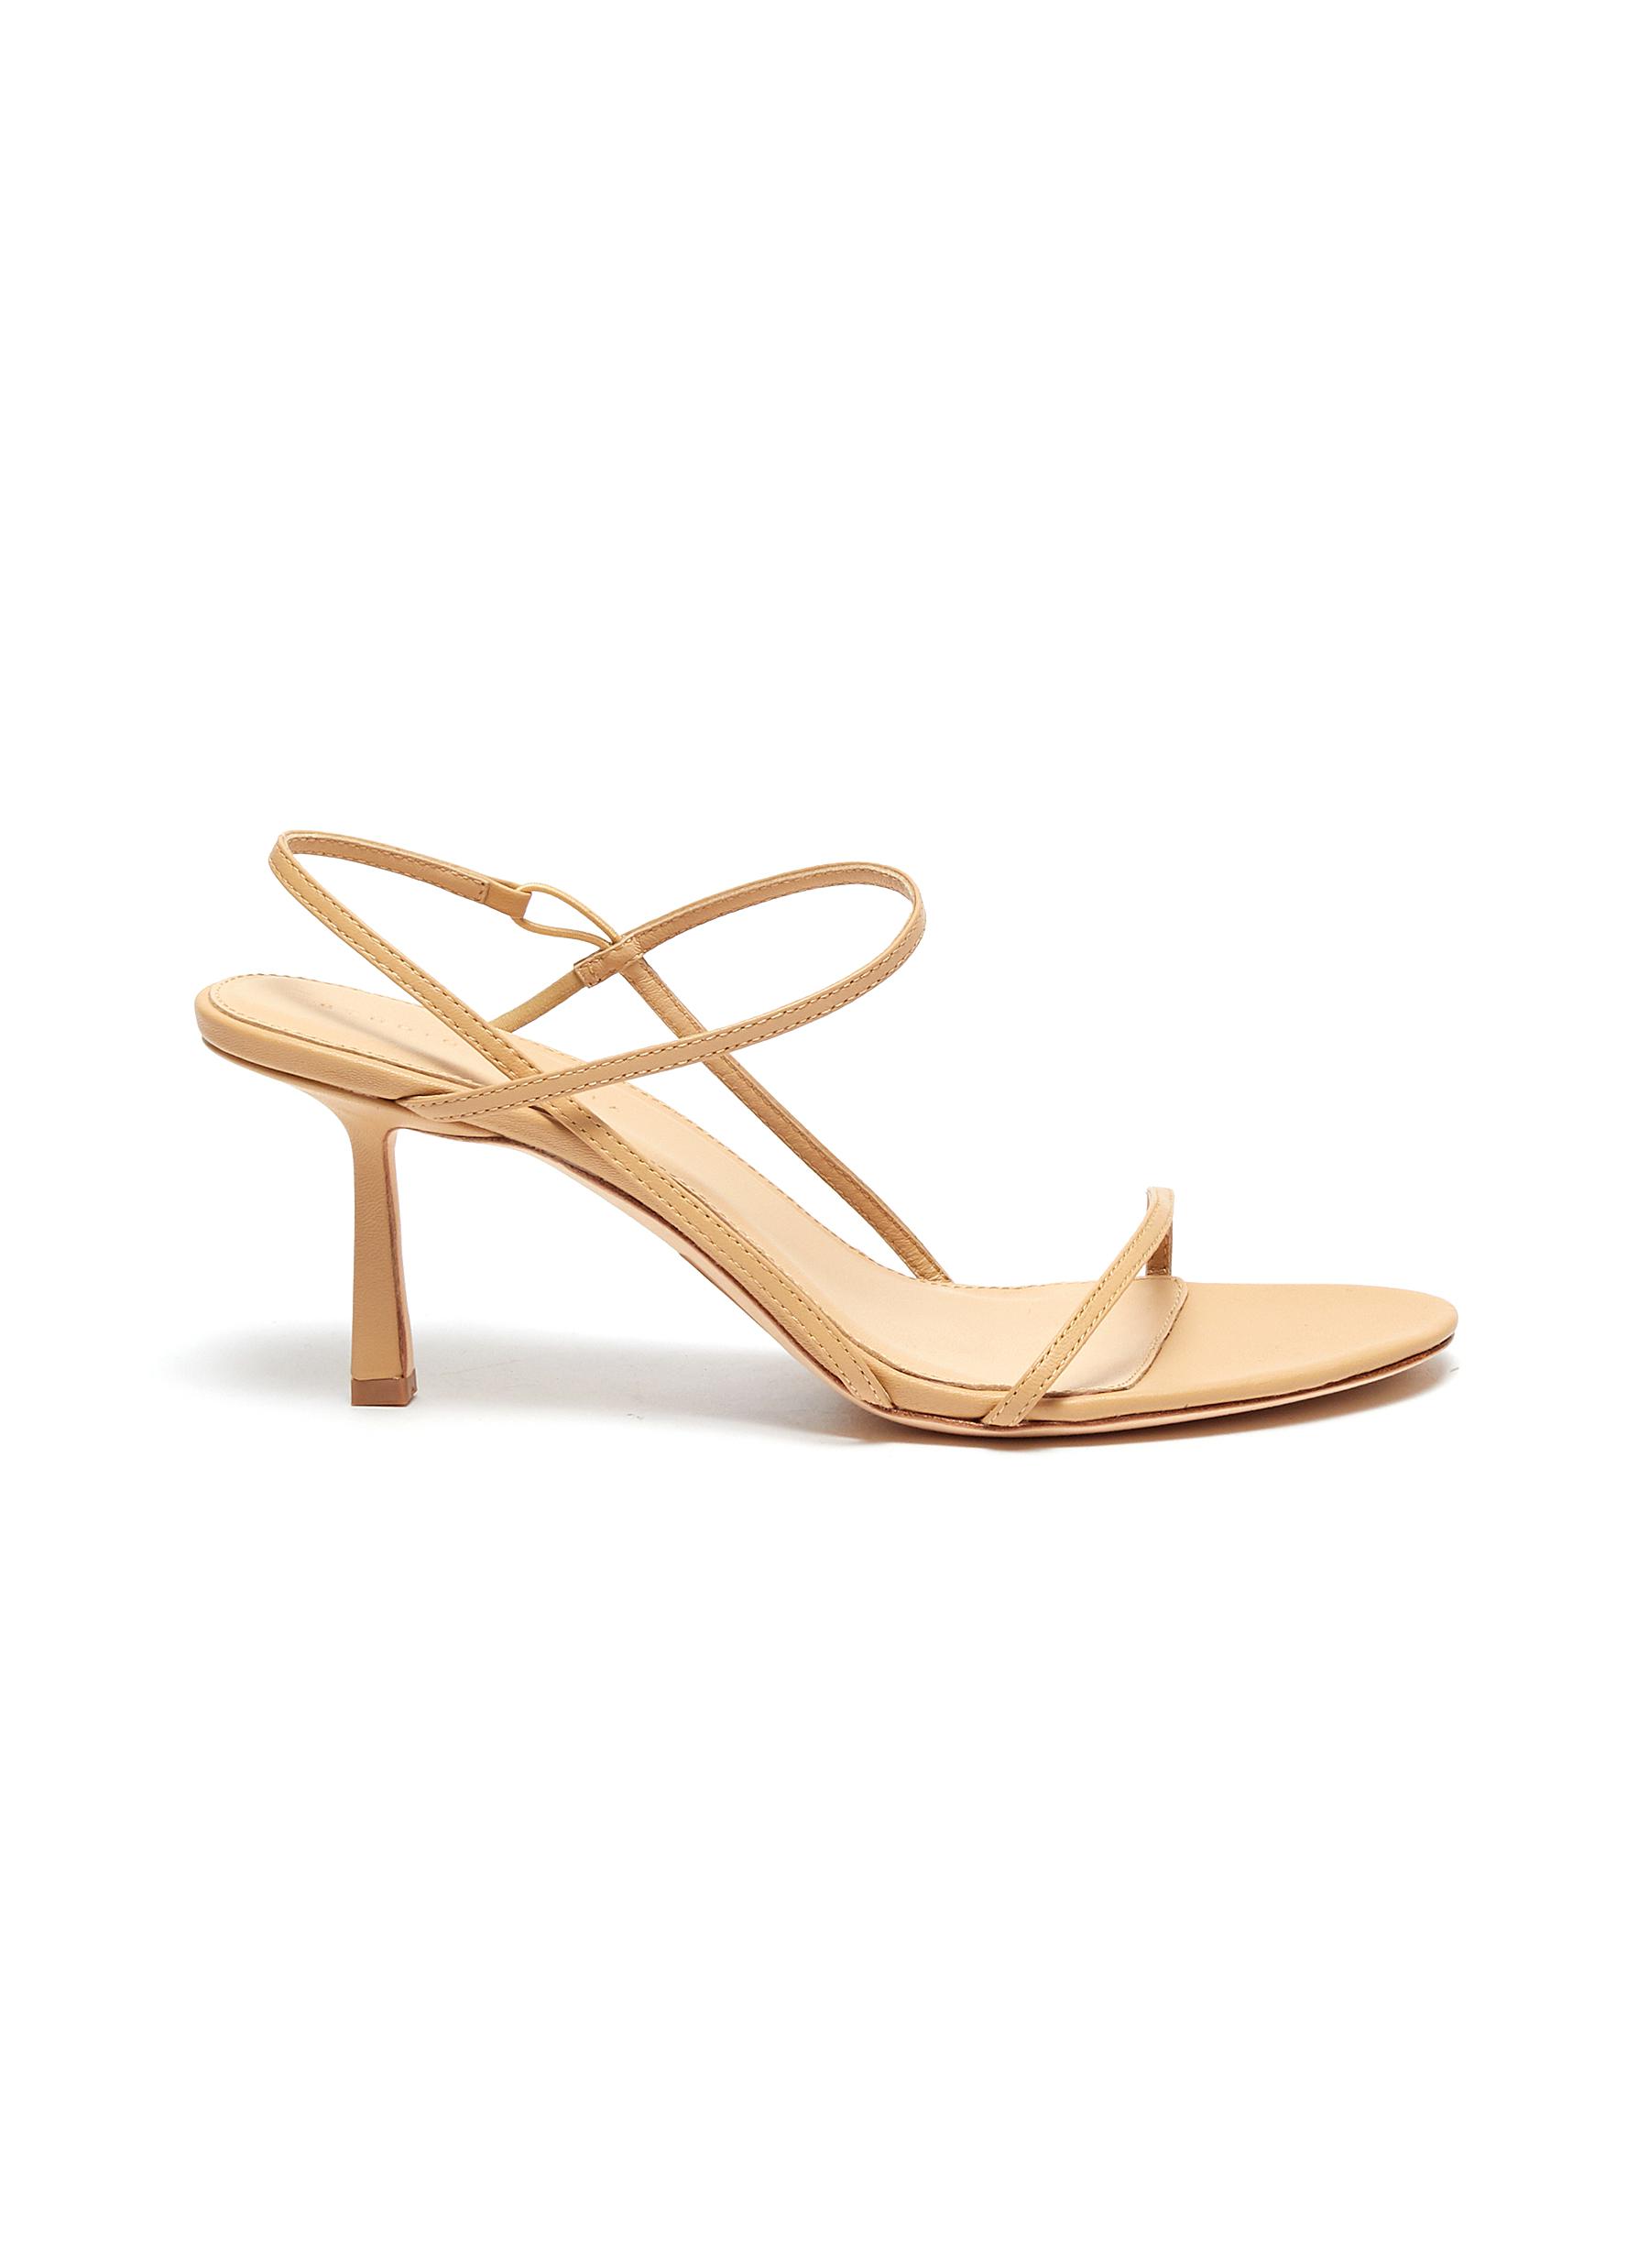 Buy 2.3 strappy leather sandals by Studio Amelia Online | Shoe Trove